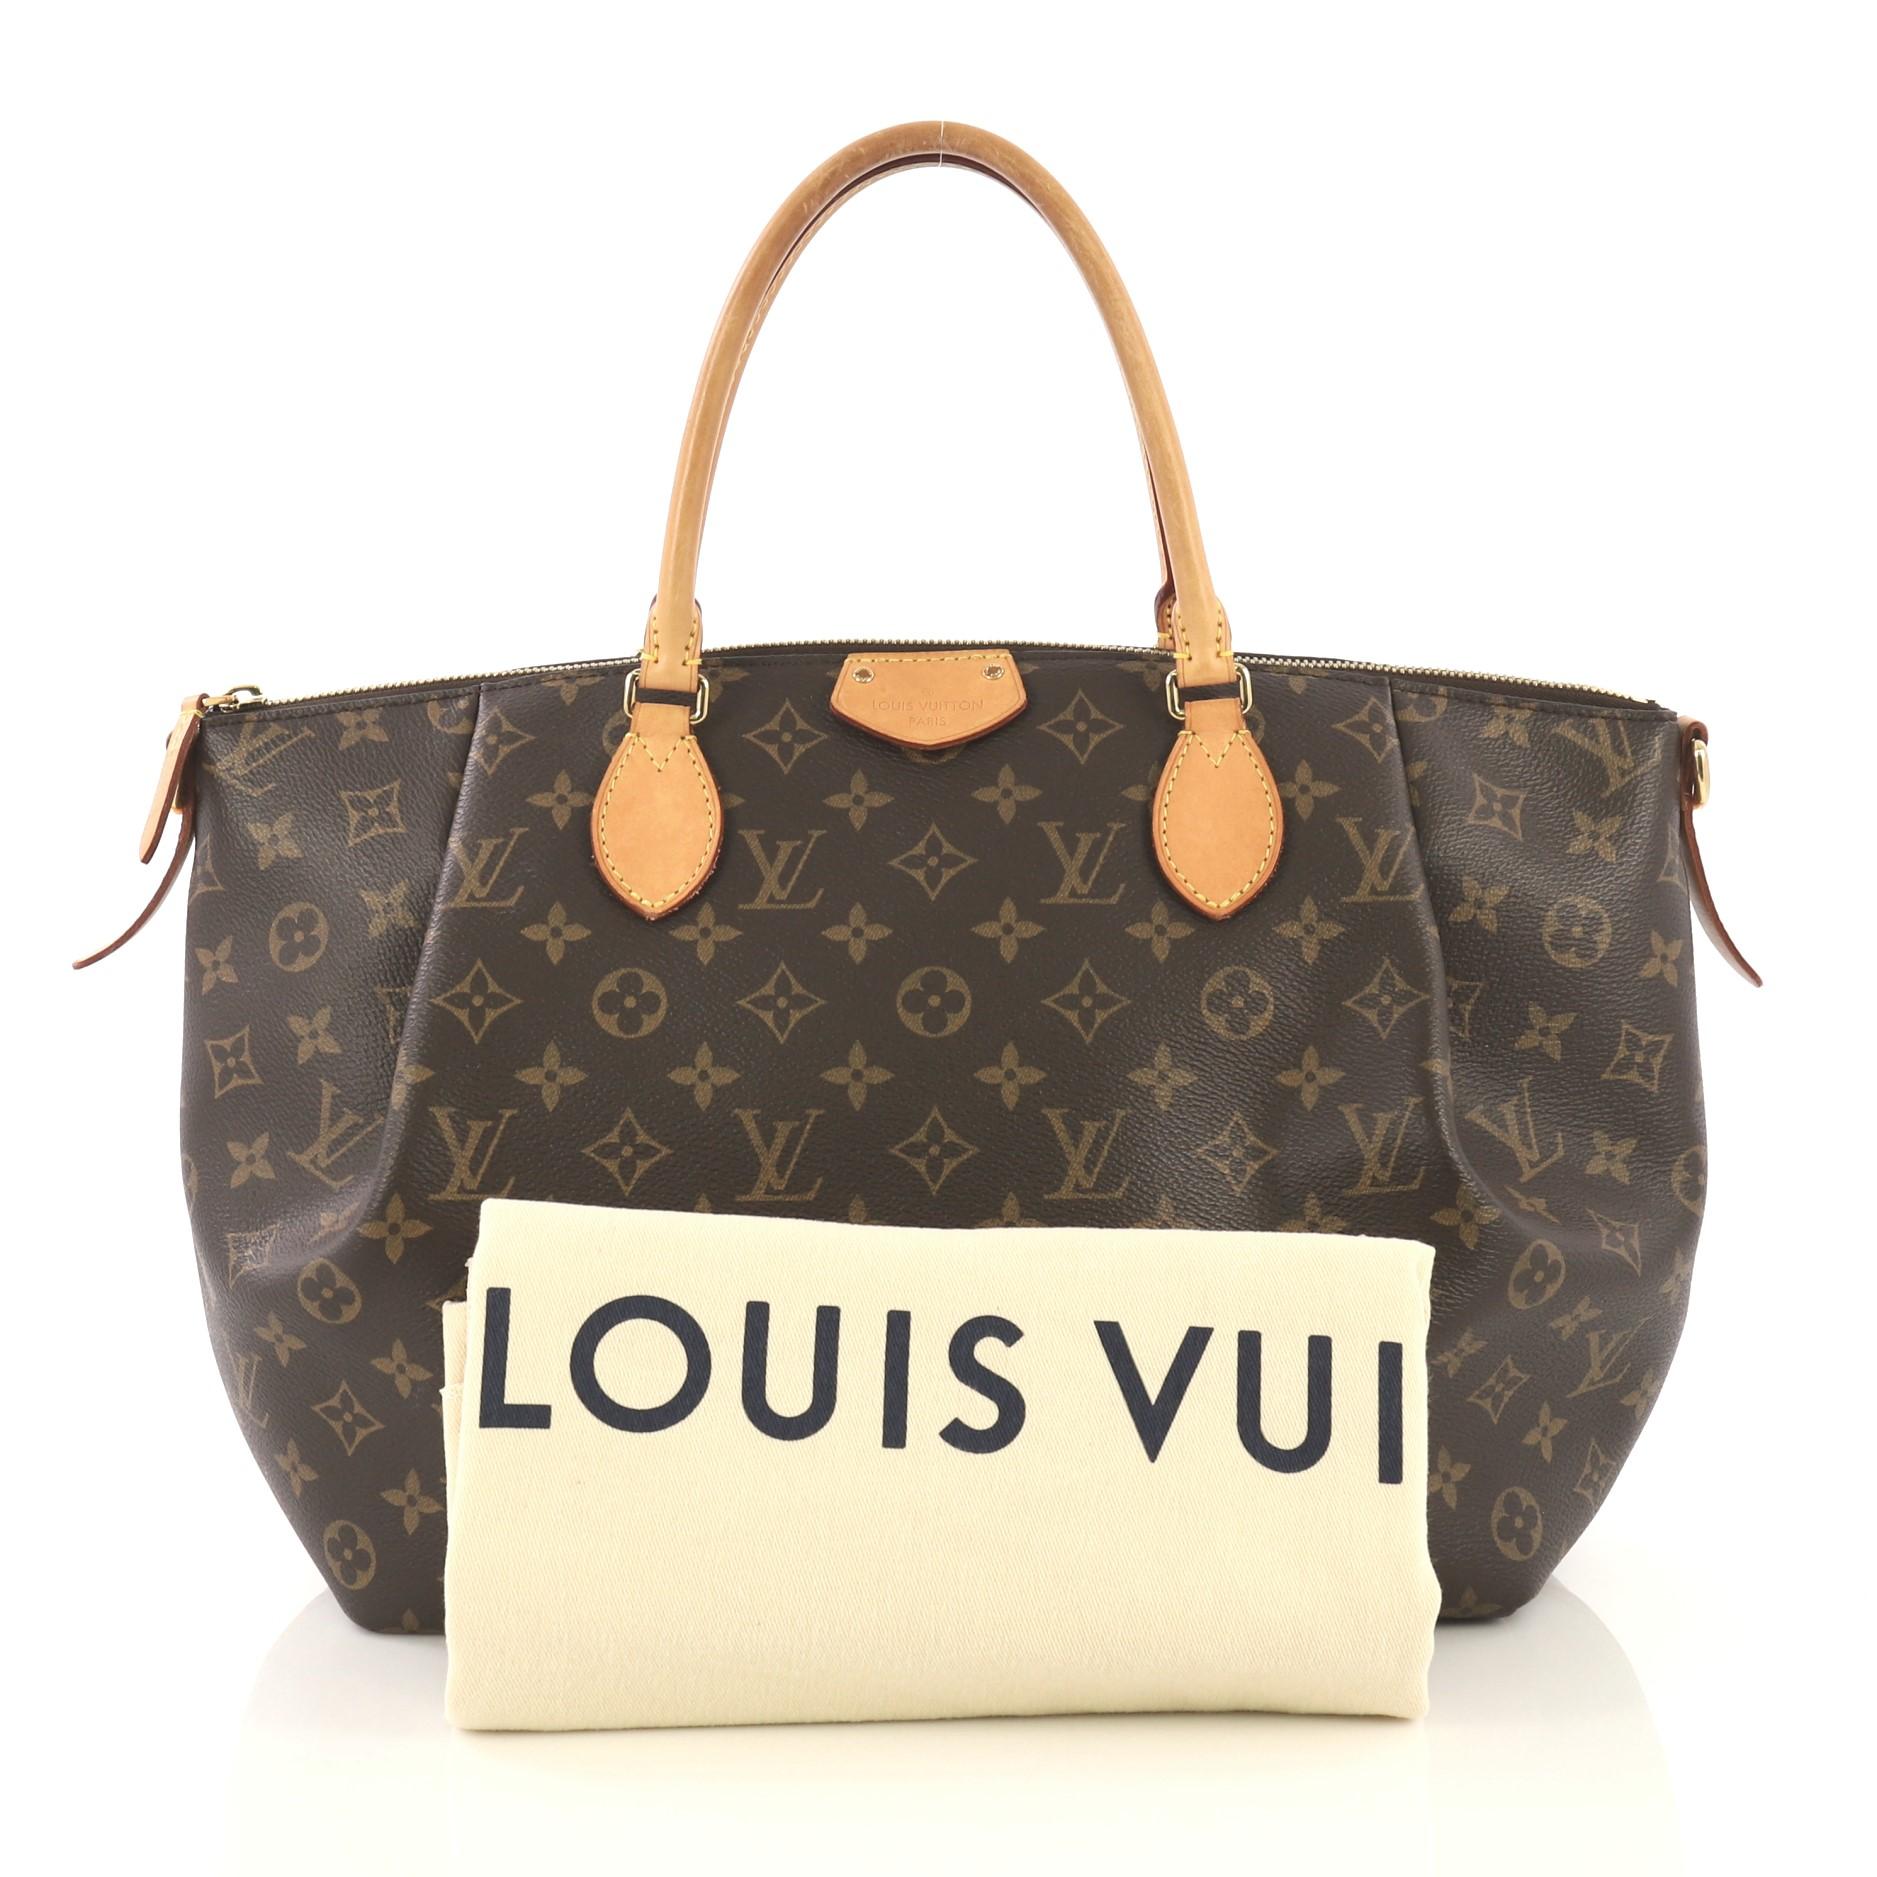 Louis Vuitton Turenne - For Sale on 1stDibs